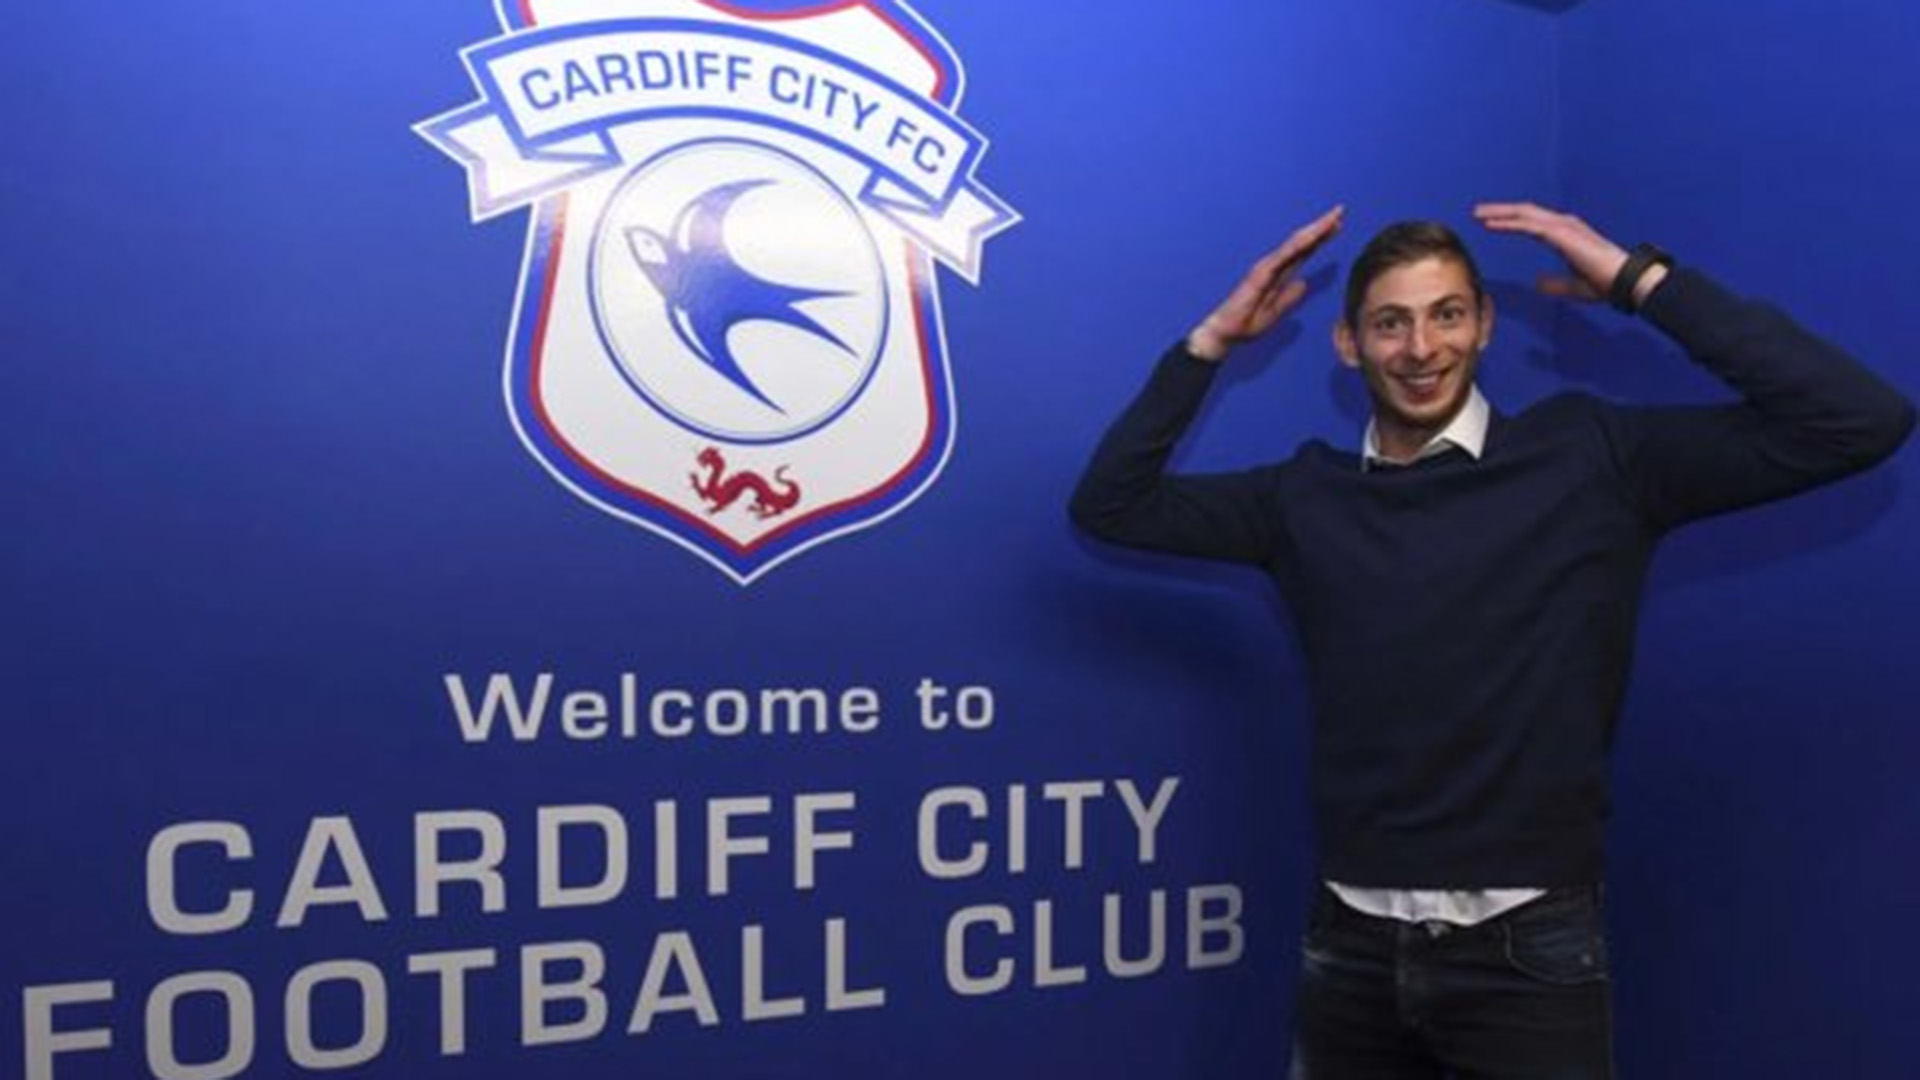 Sala had been presented by Cardiff of Wales, which refuses to pay the transfer